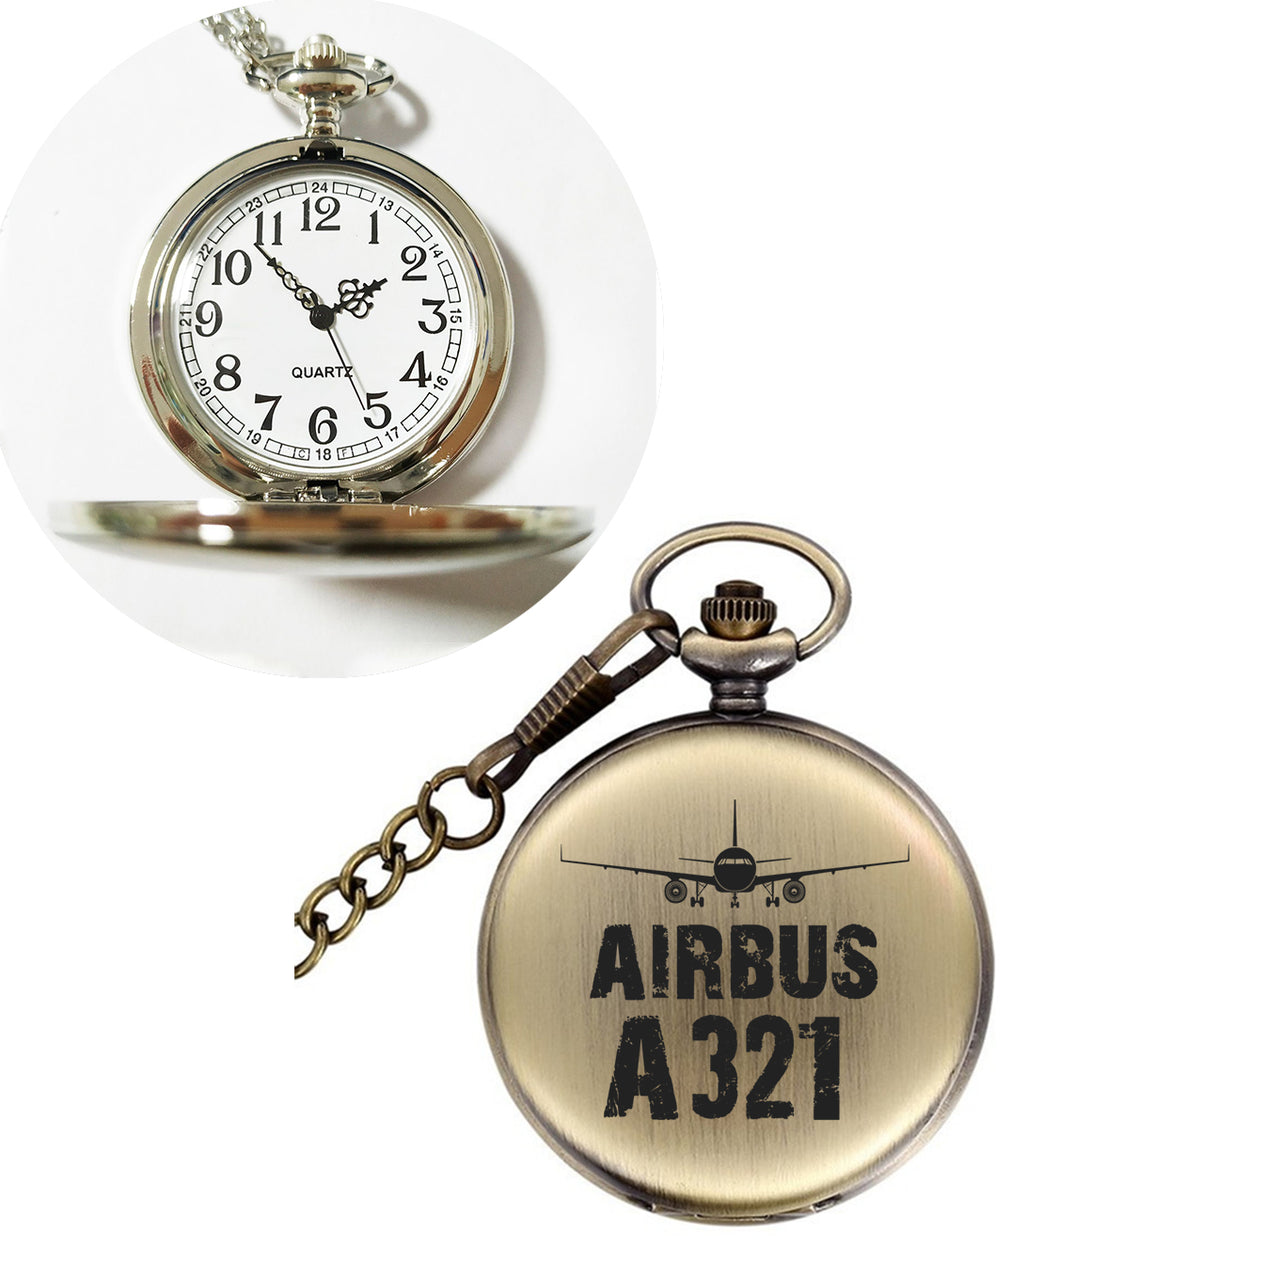 Airbus A321 & Plane Designed Pocket Watches